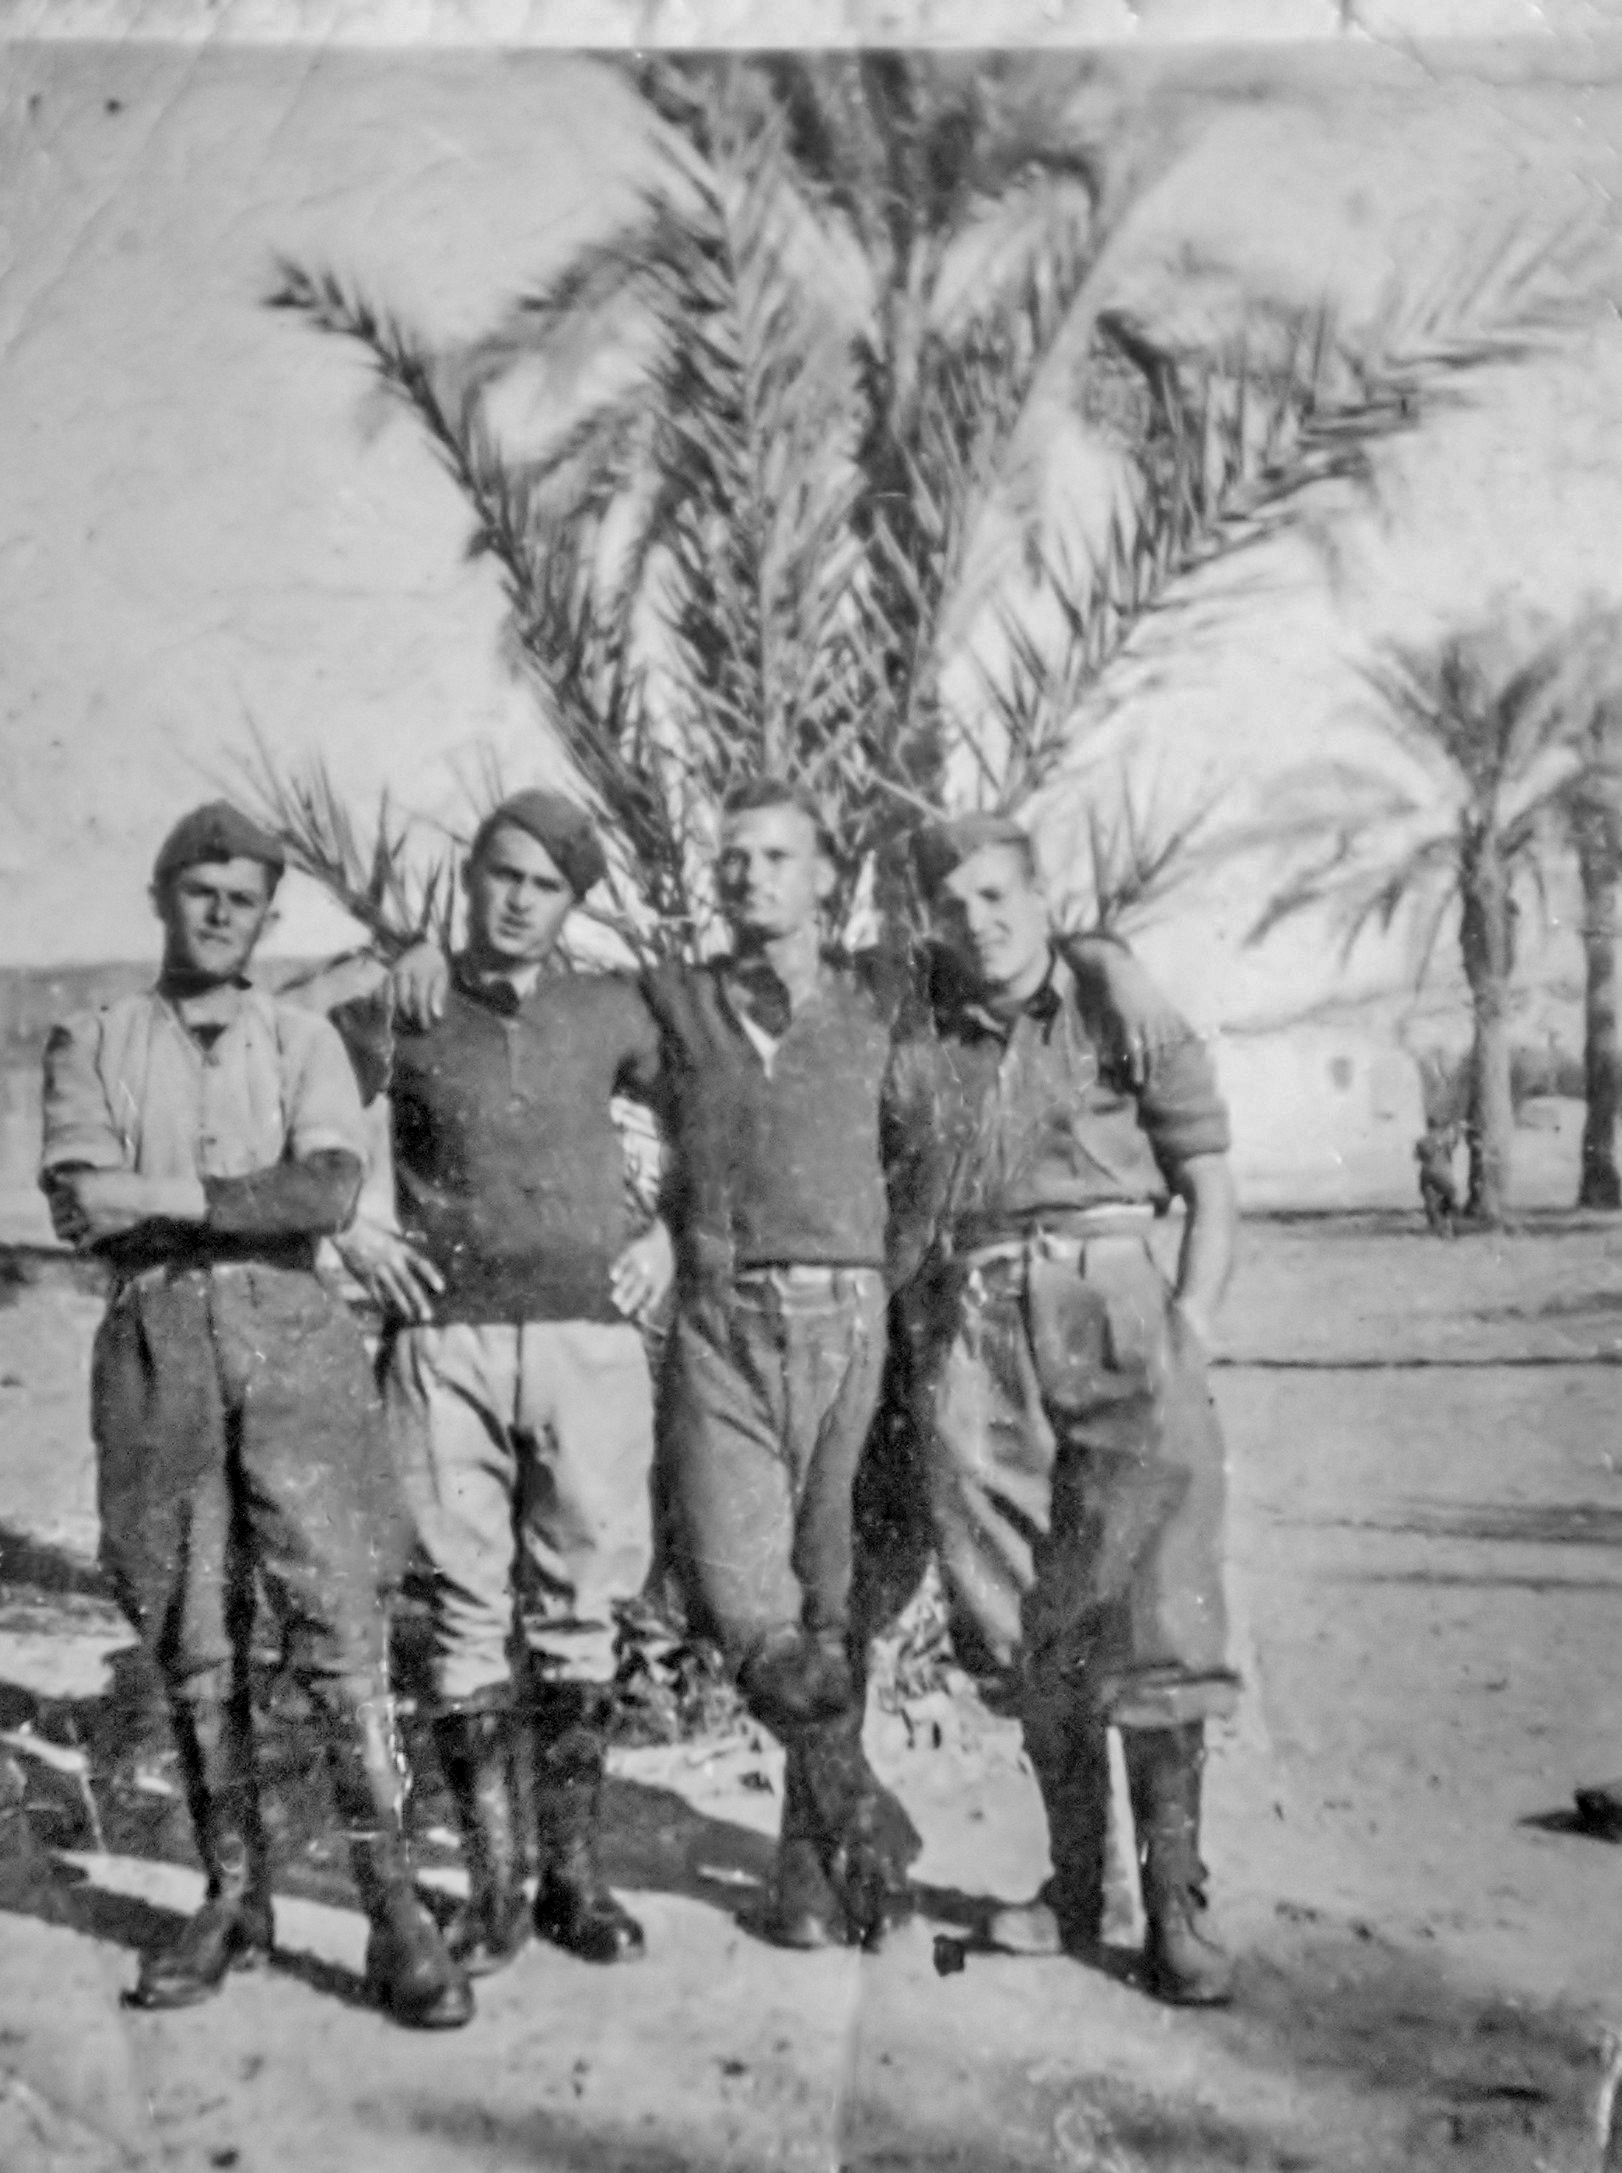 Giuseppe Torcasio:italian soldiers ww2 Giuseppe Torcasio: second from the right in North Africa WWII by johntorcasio